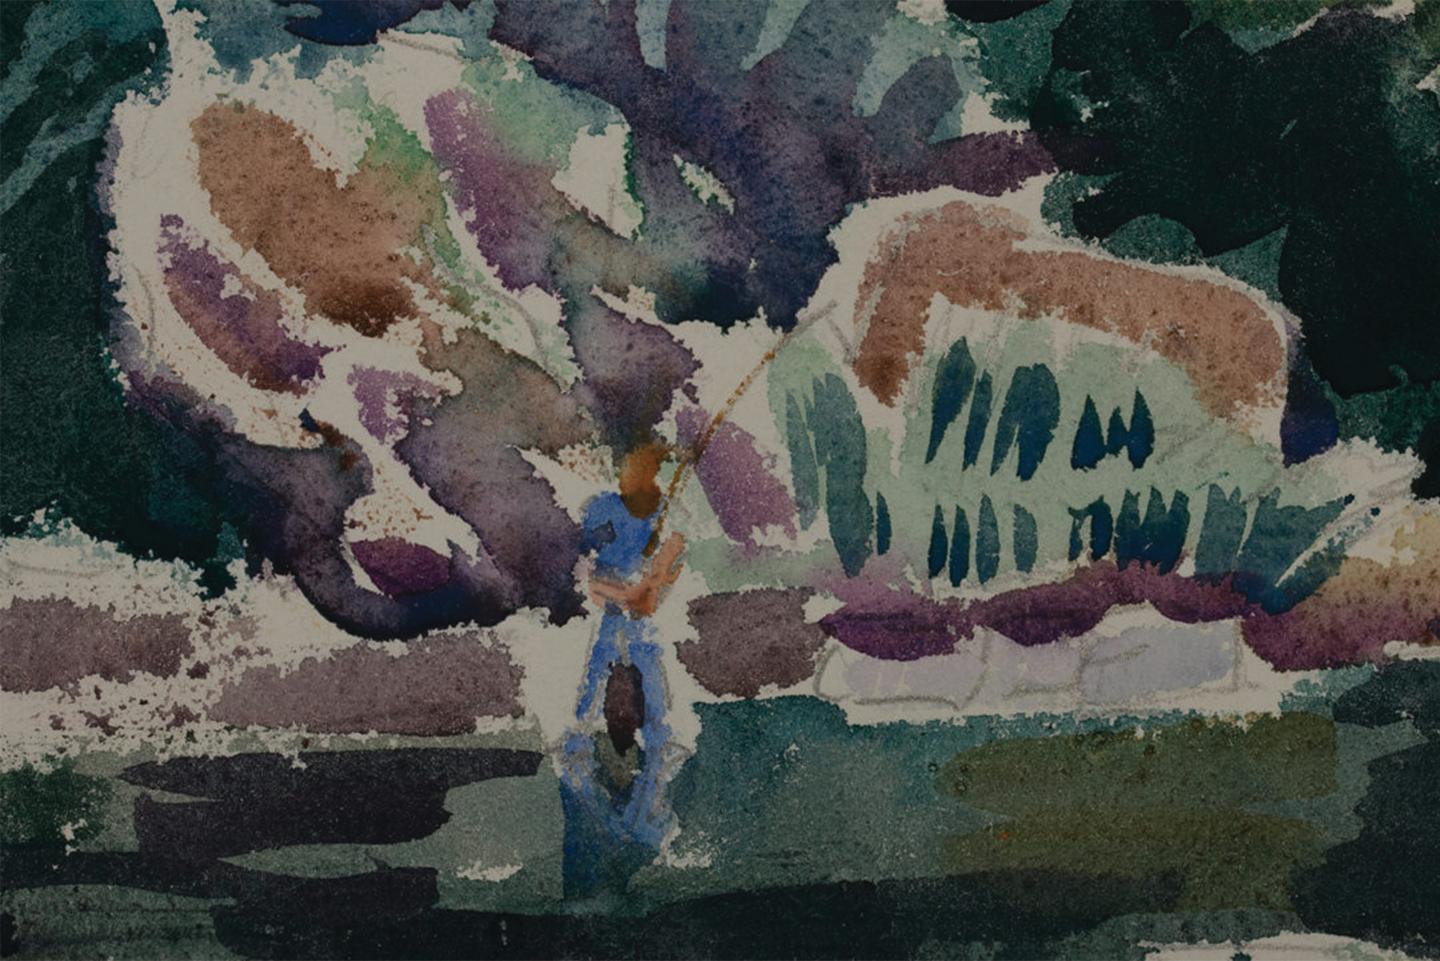 Work sold to benefit the CLEVELAND INSTITUTE OF ART

Joseph B. O’Sickey (American, 1918–2013)
Summer Trees
Watercolor on paper
Signed lower right 
11.5 x 15.5 inches

Joseph O'Sickey, born in Detroit in 1918, was a painter and teacher throughout his